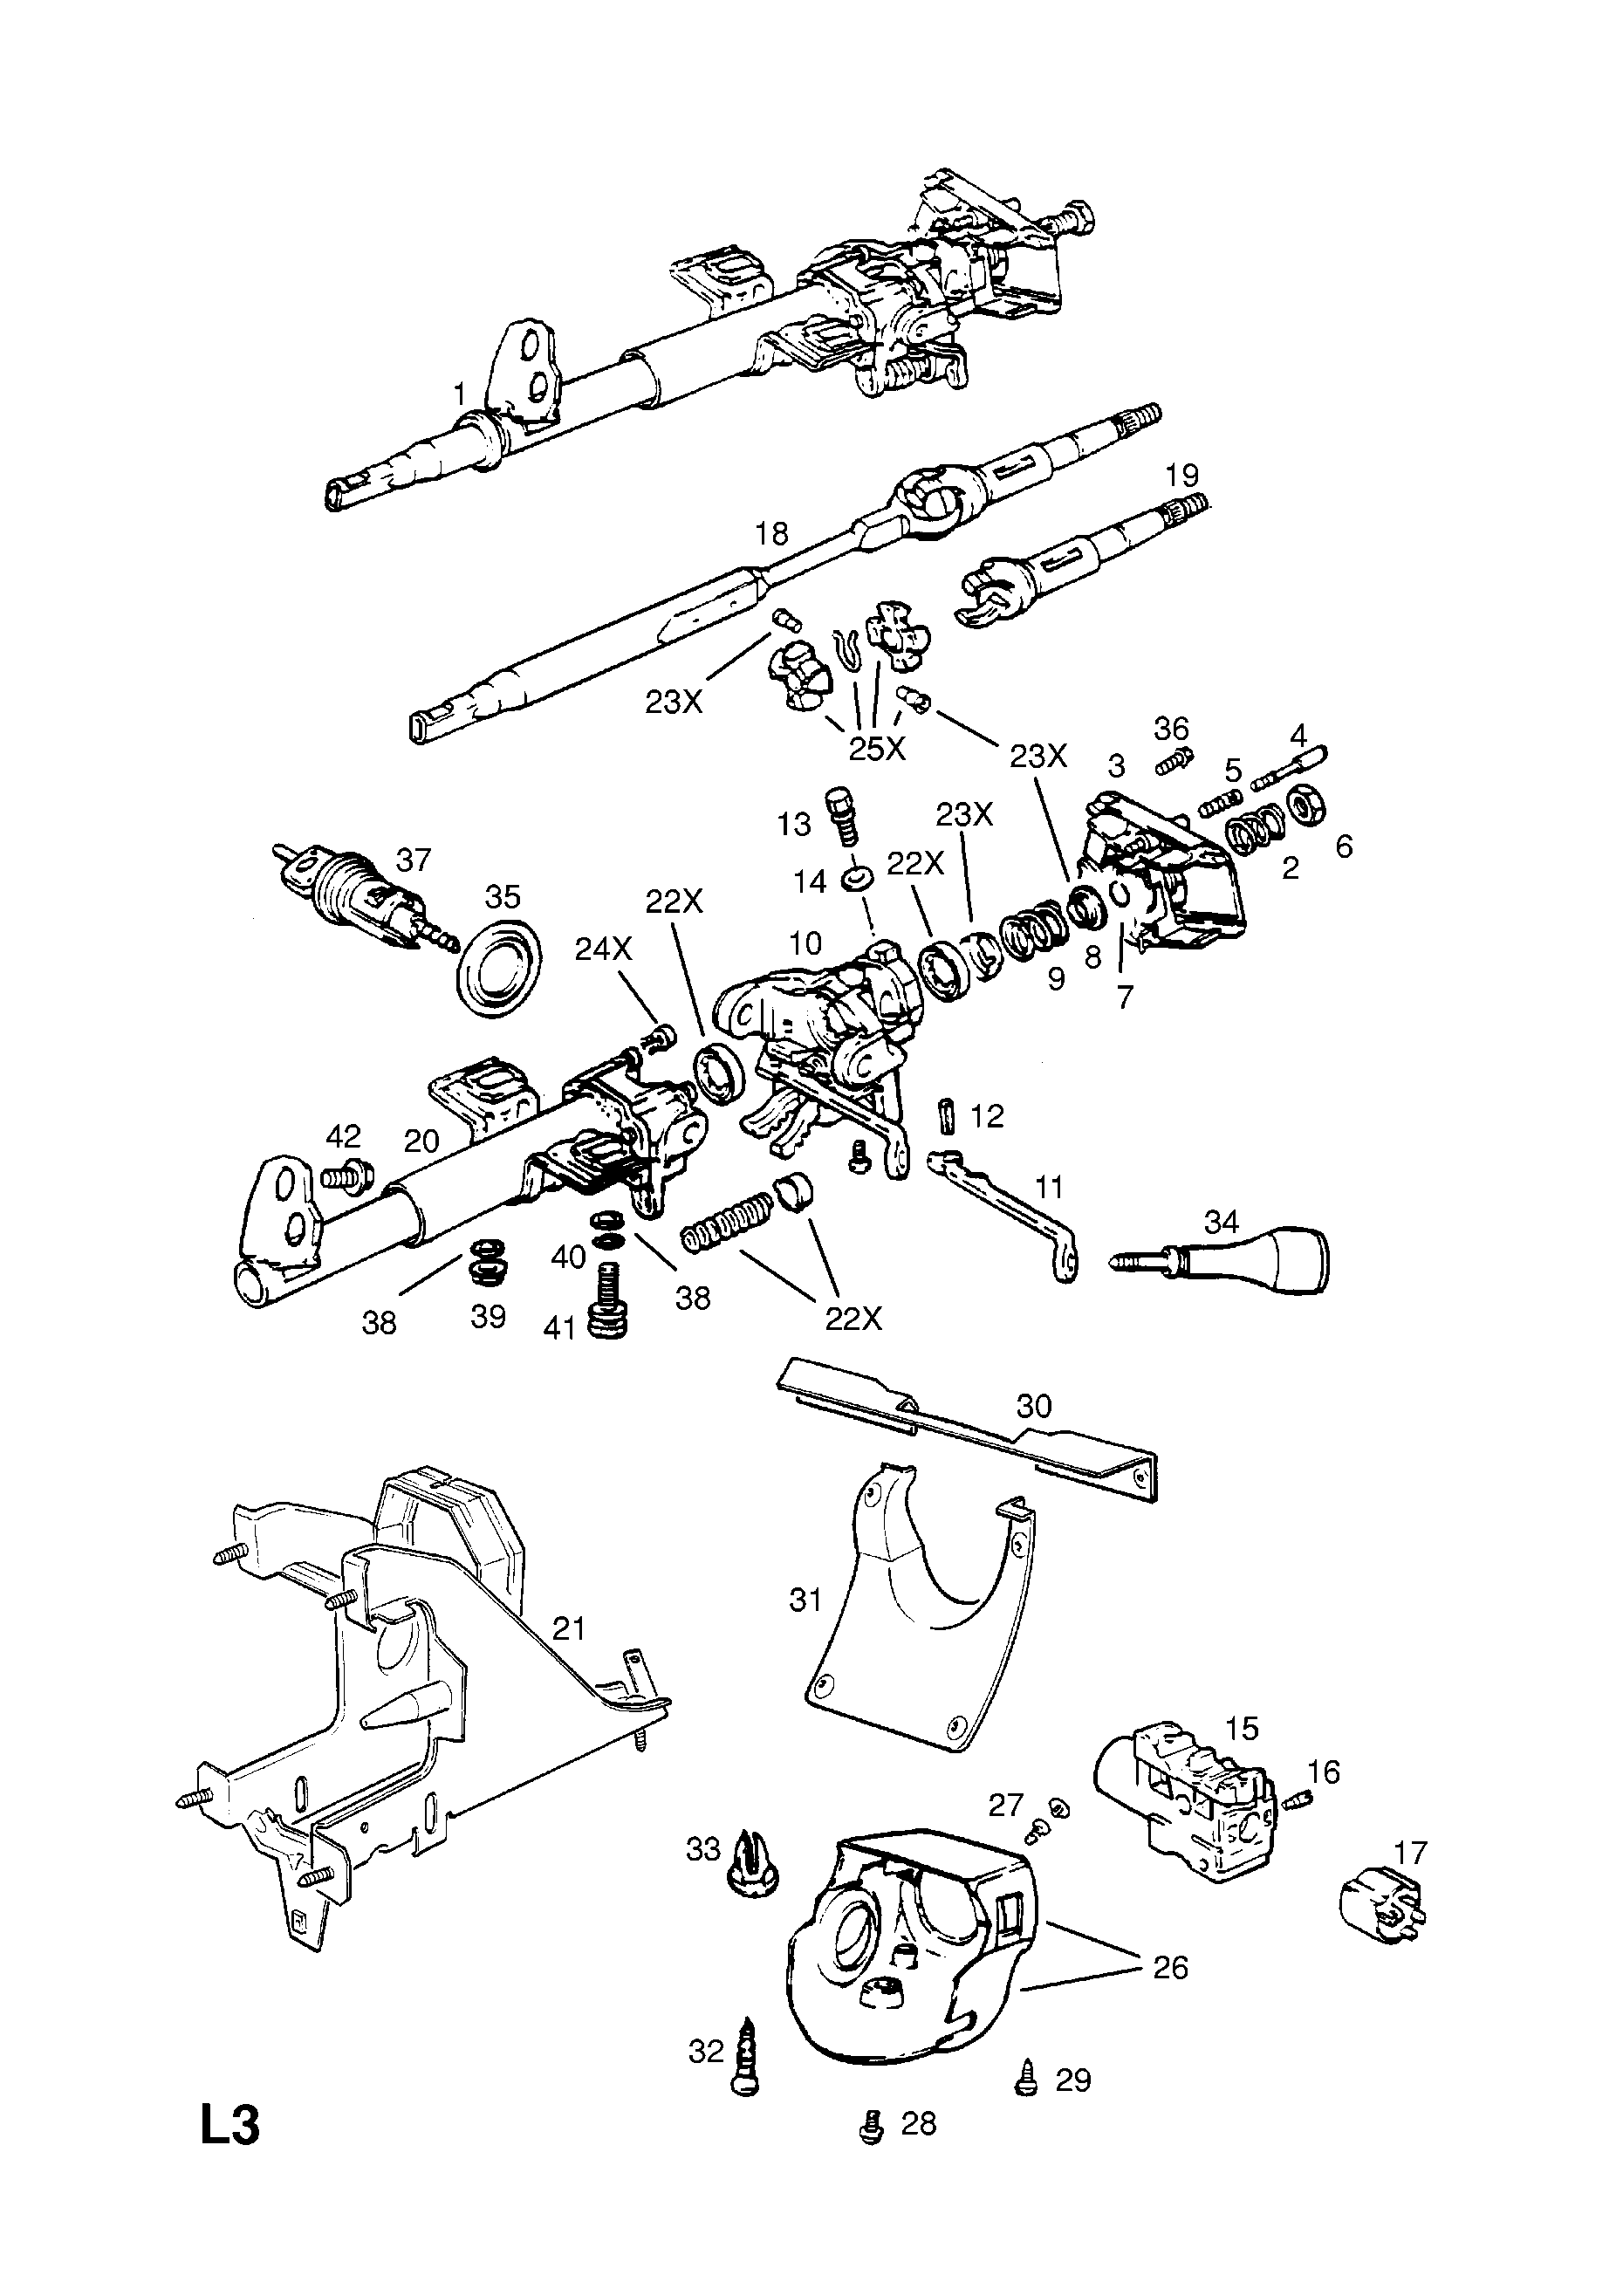 STEERING COLUMN (CONTD.) <small><i>[FOR TILTING STEERING COLUMN]</i></small>